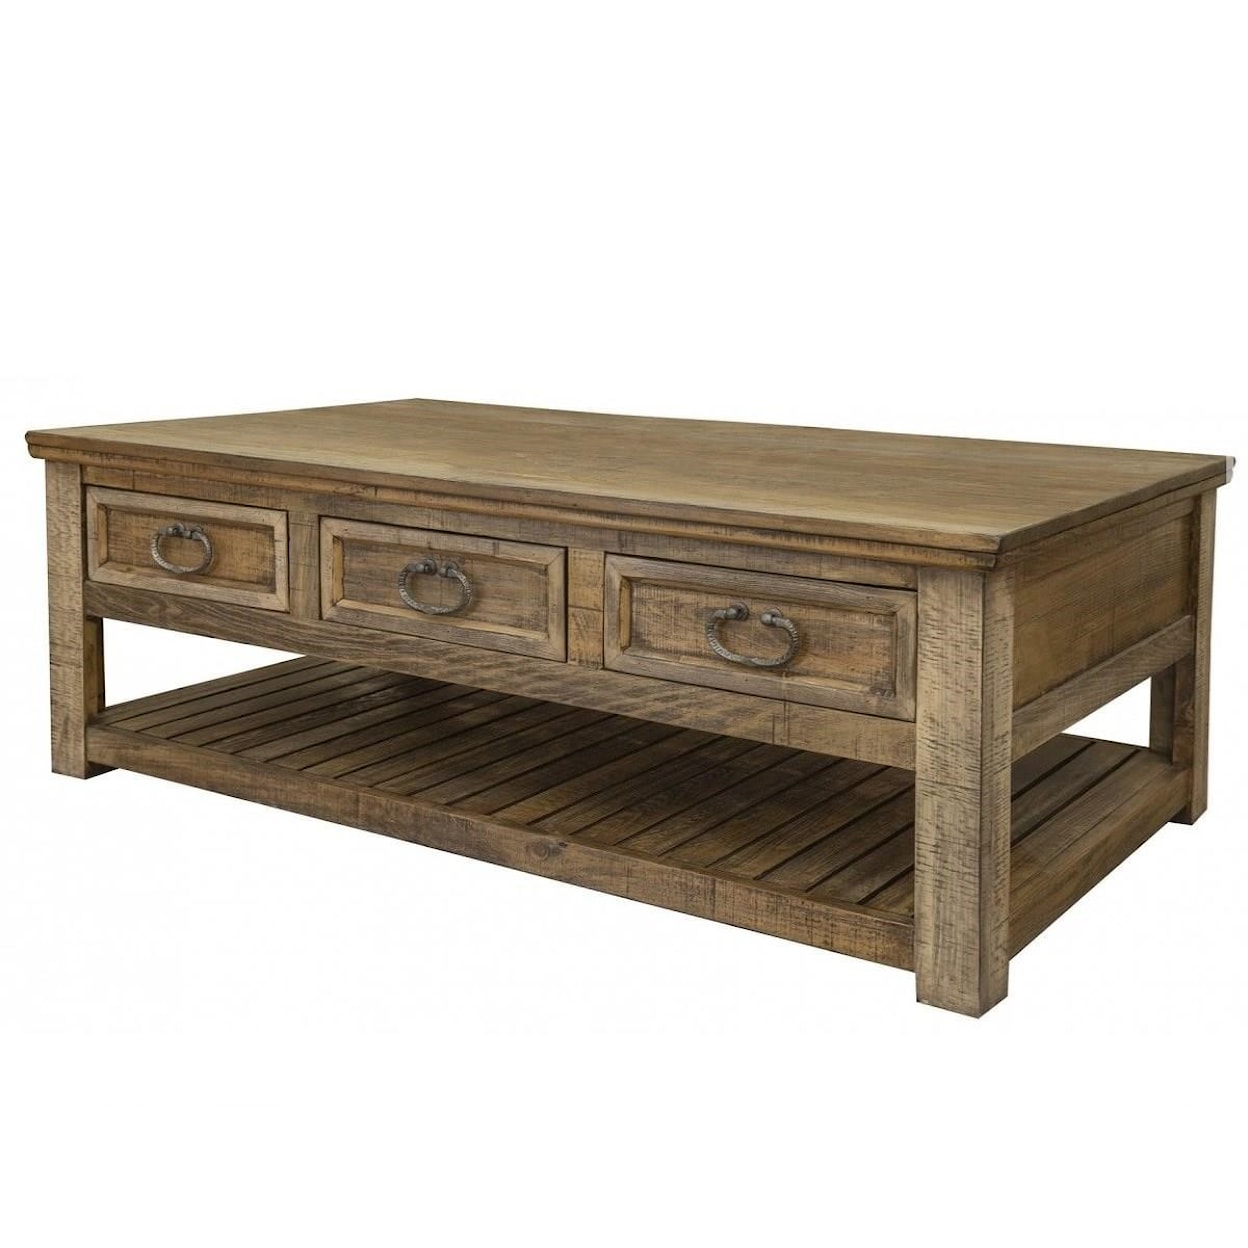 VFM Signature Montana Cocktail Table with 6 Drawers